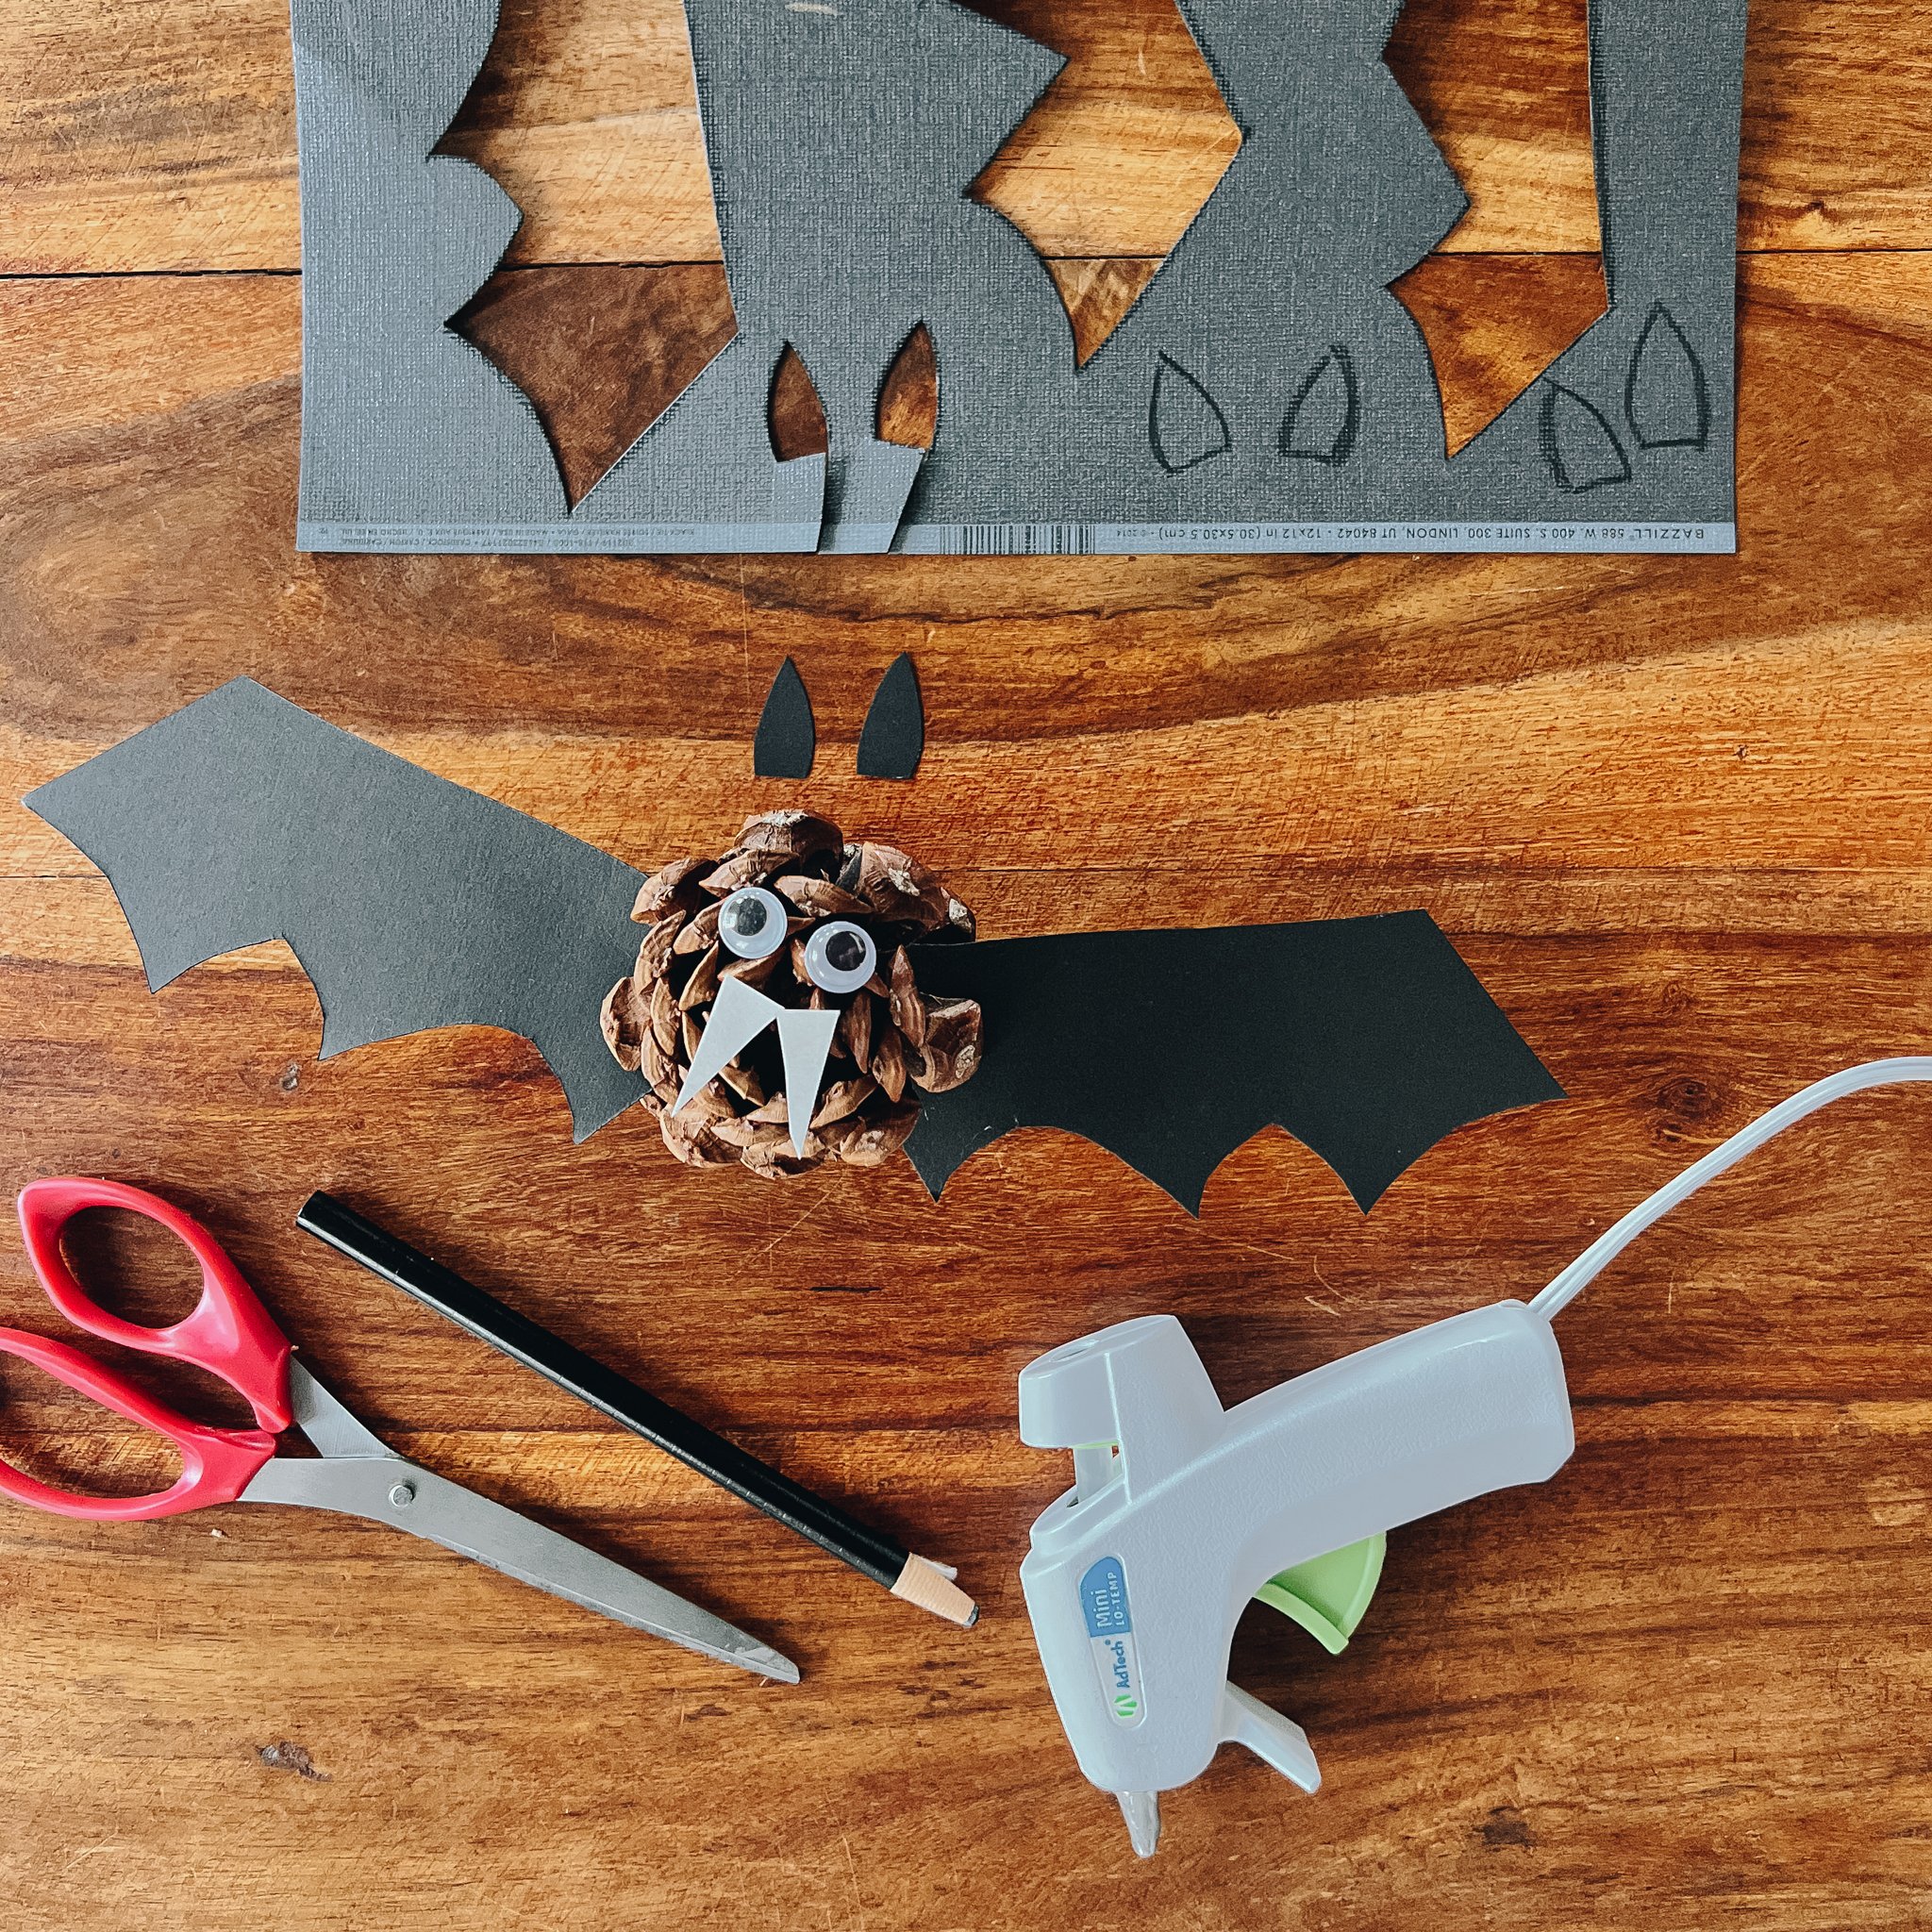 Adorable Pinecone Bat Craft Your Kids Will Enjoy Creating This